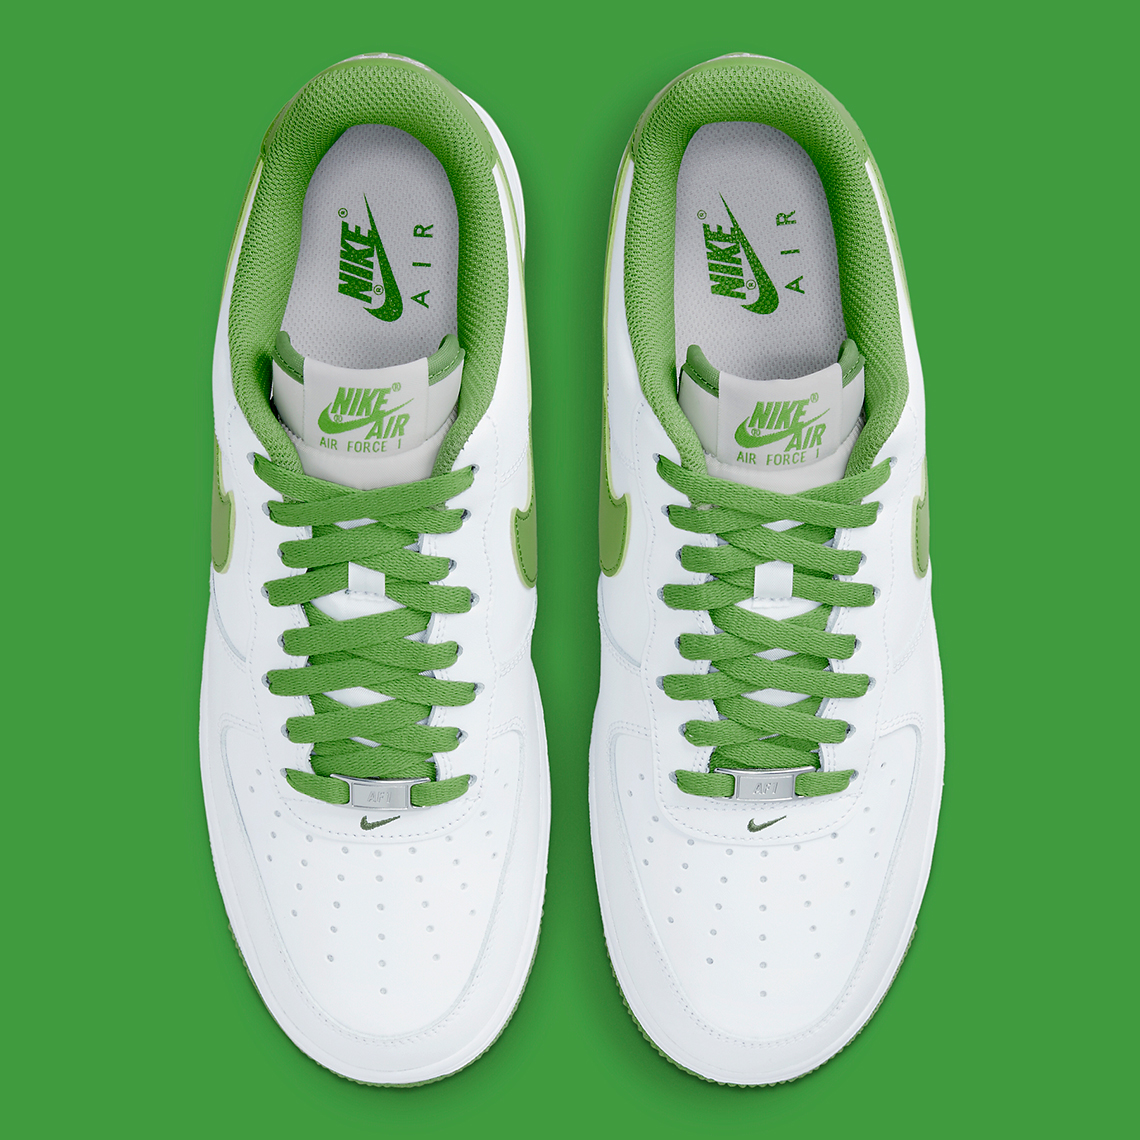 Nike Air Force 1 Low White Green DH7561-105 | SneakerNews.com